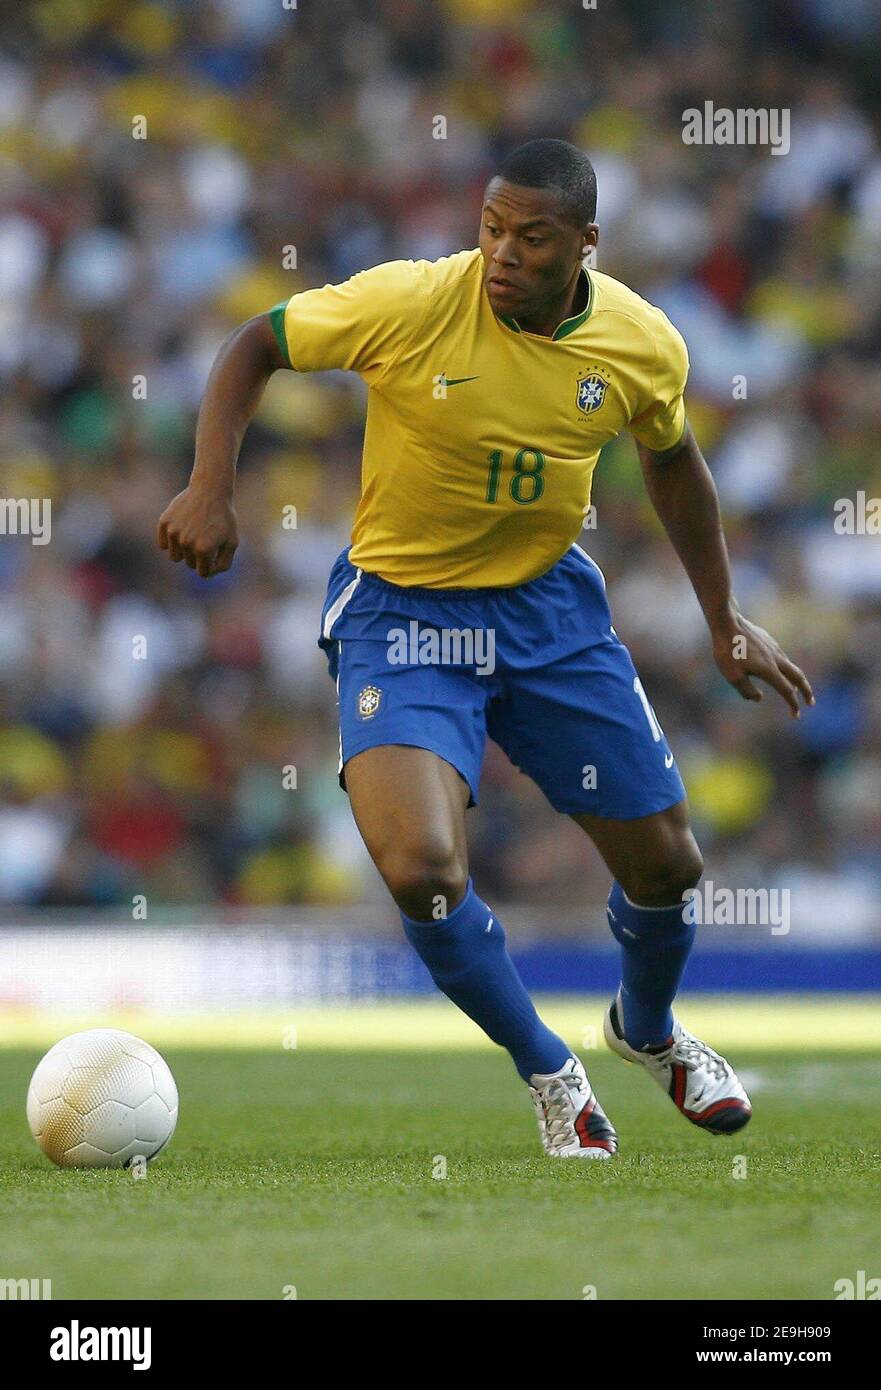 Brazil's Julio Baptista in action during the International Friendly match, Brazil vs Argentina at Emirates Stadium, in London, UK, on September 3, 2006. Brazil won 3-0. Photo by Christian Liewig/ABACAPRESS.COM Stock Photo